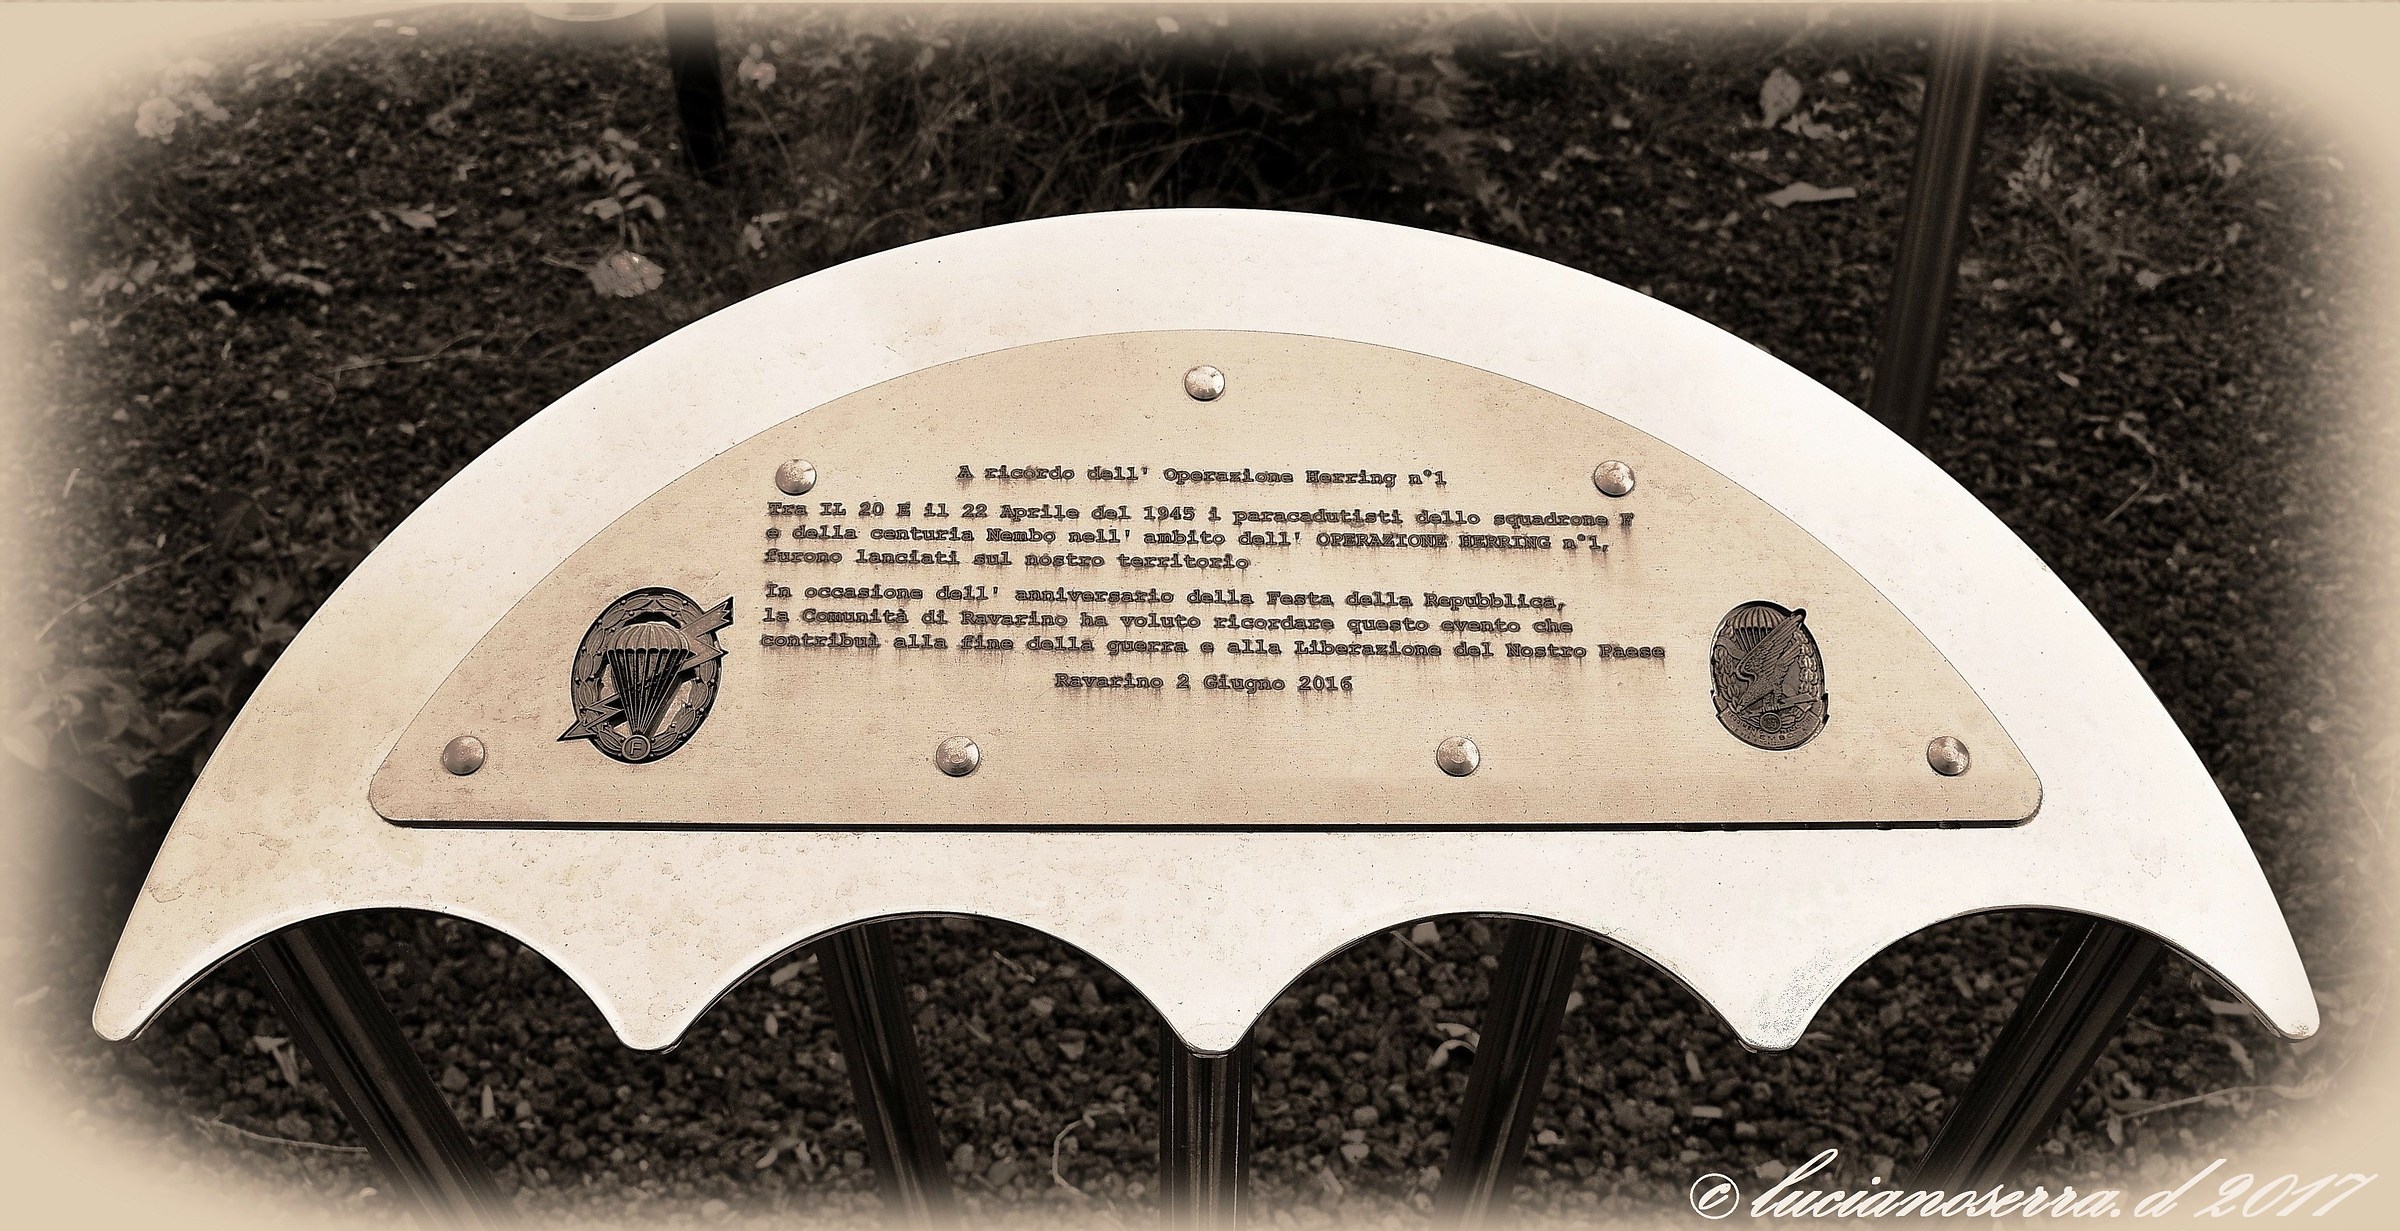 Souvenir plate placed in Ravarino (Mo) on June 2, 2016...